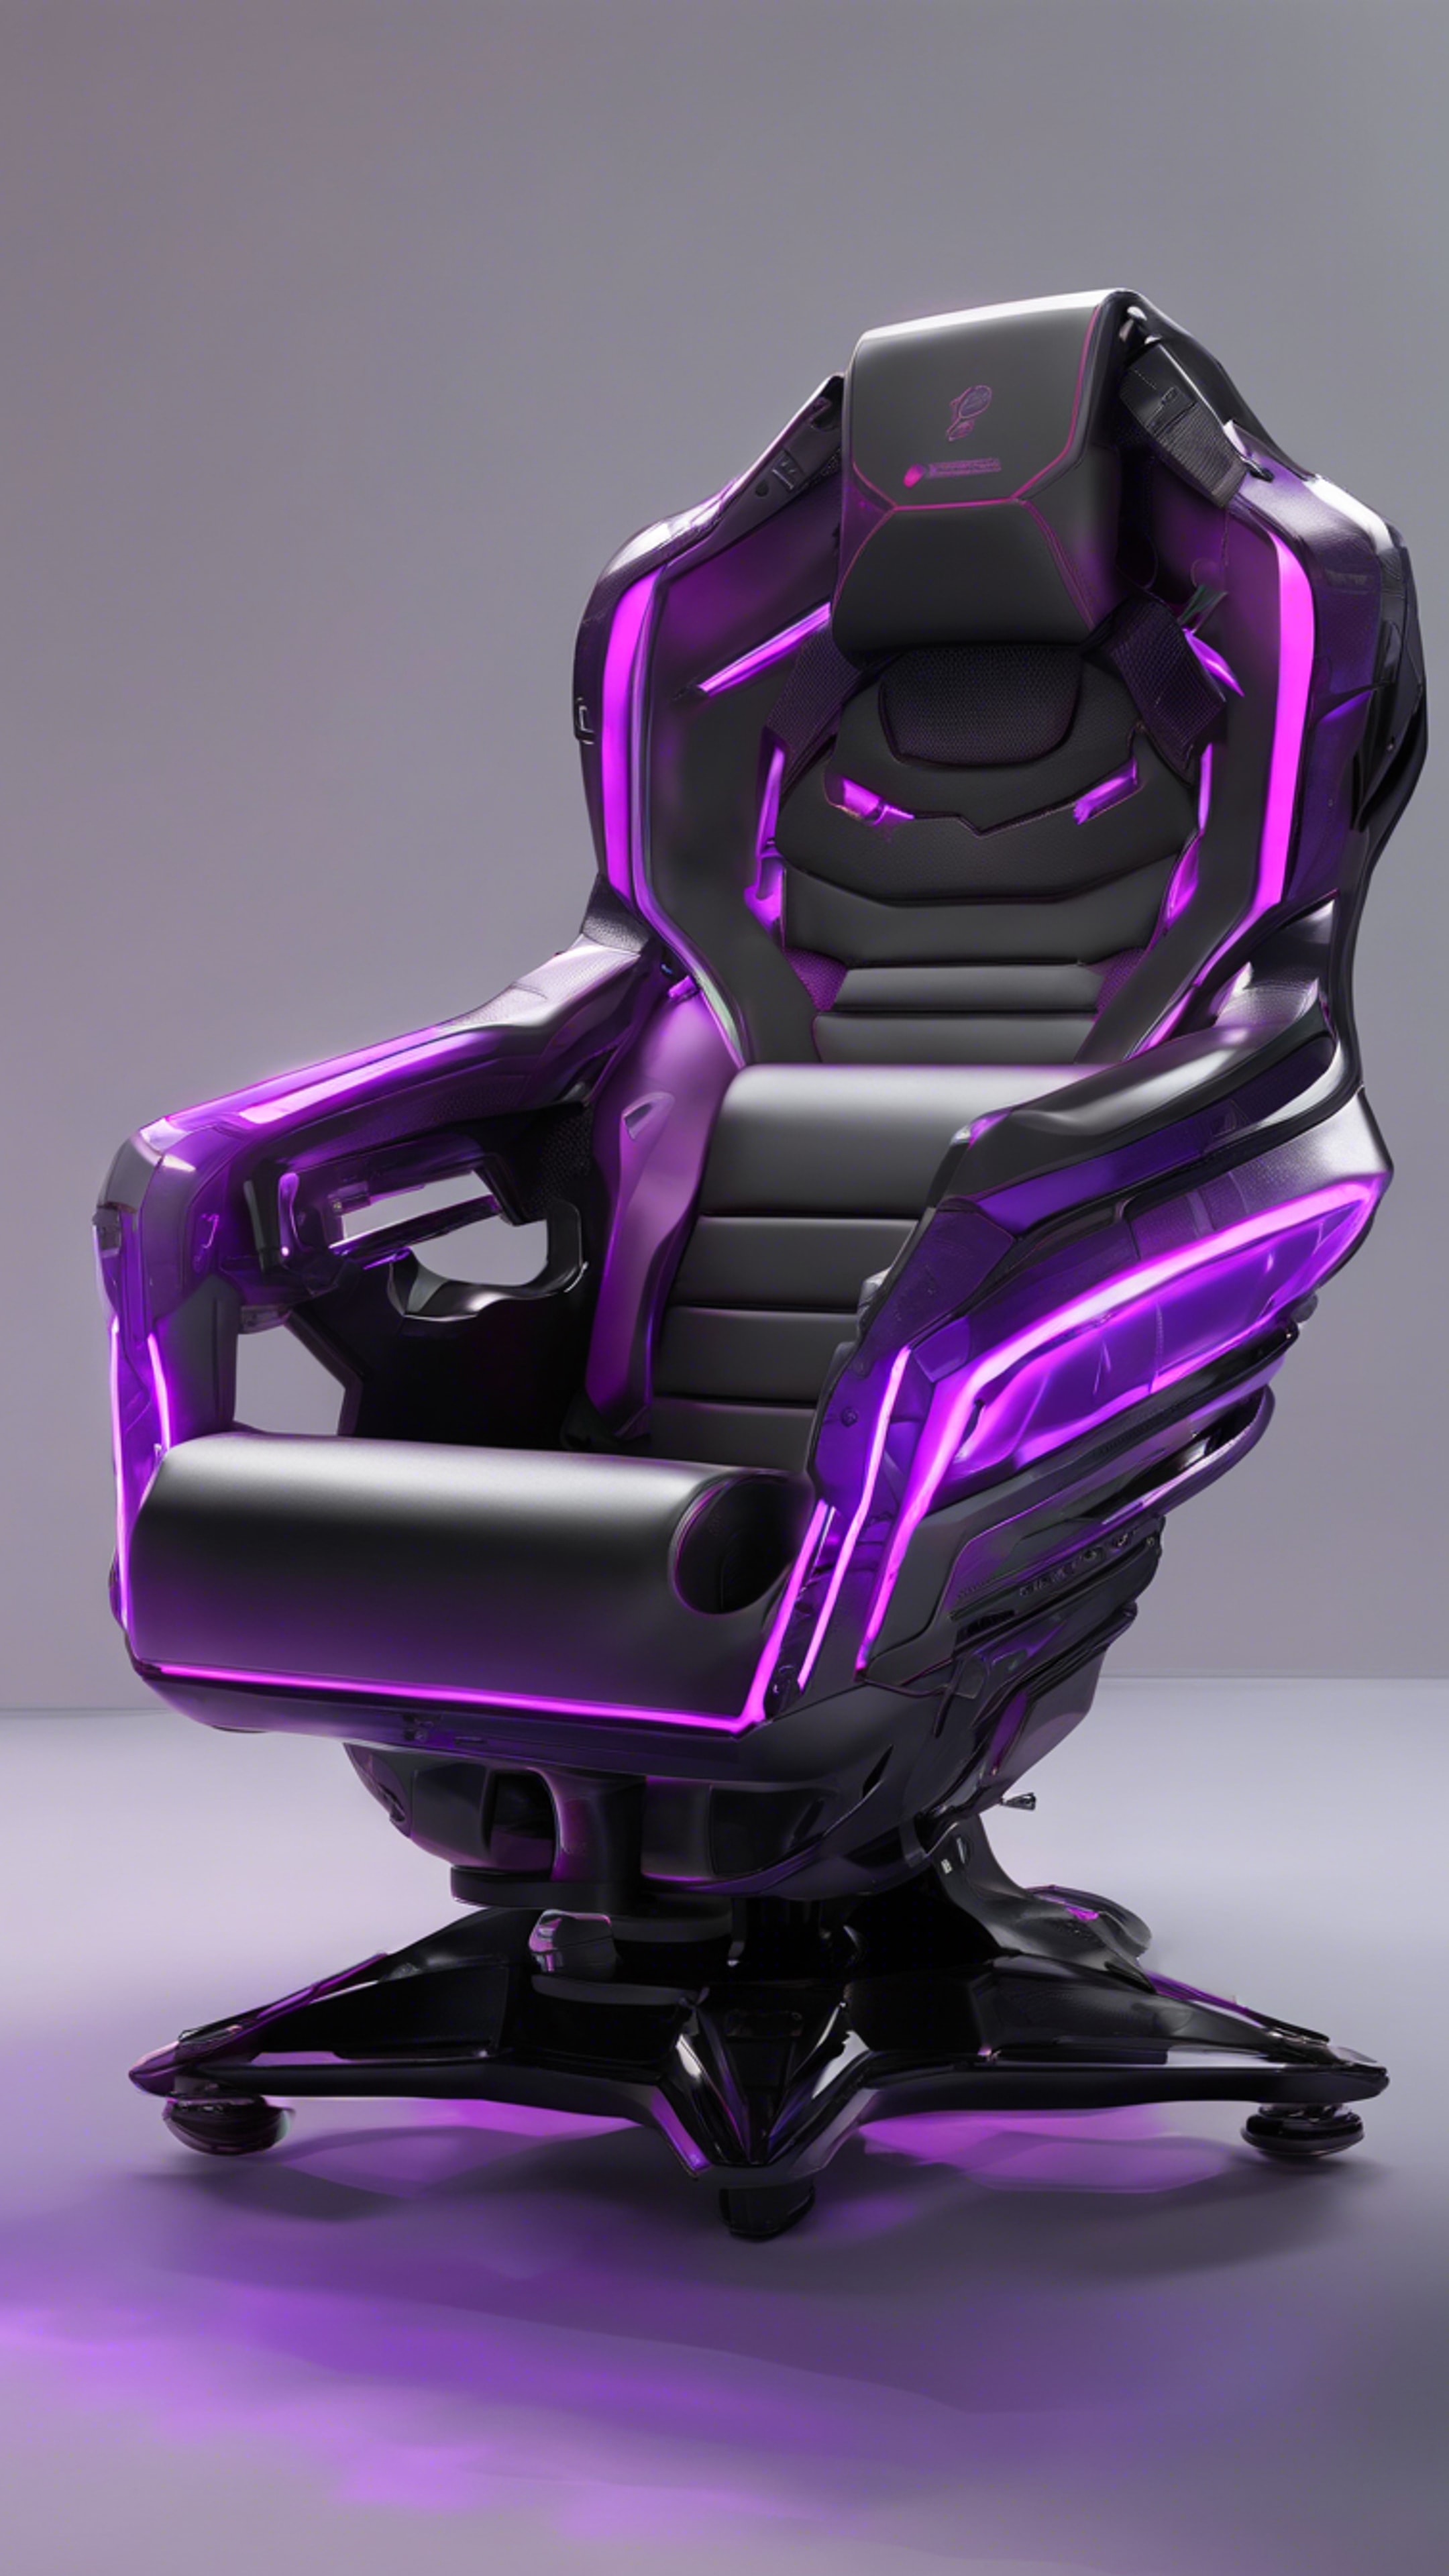 A futuristic gaming chair, jet black with neon purple accents, situated in a high-tech gaming station. Wallpaper[77c4183ef08040e08e97]